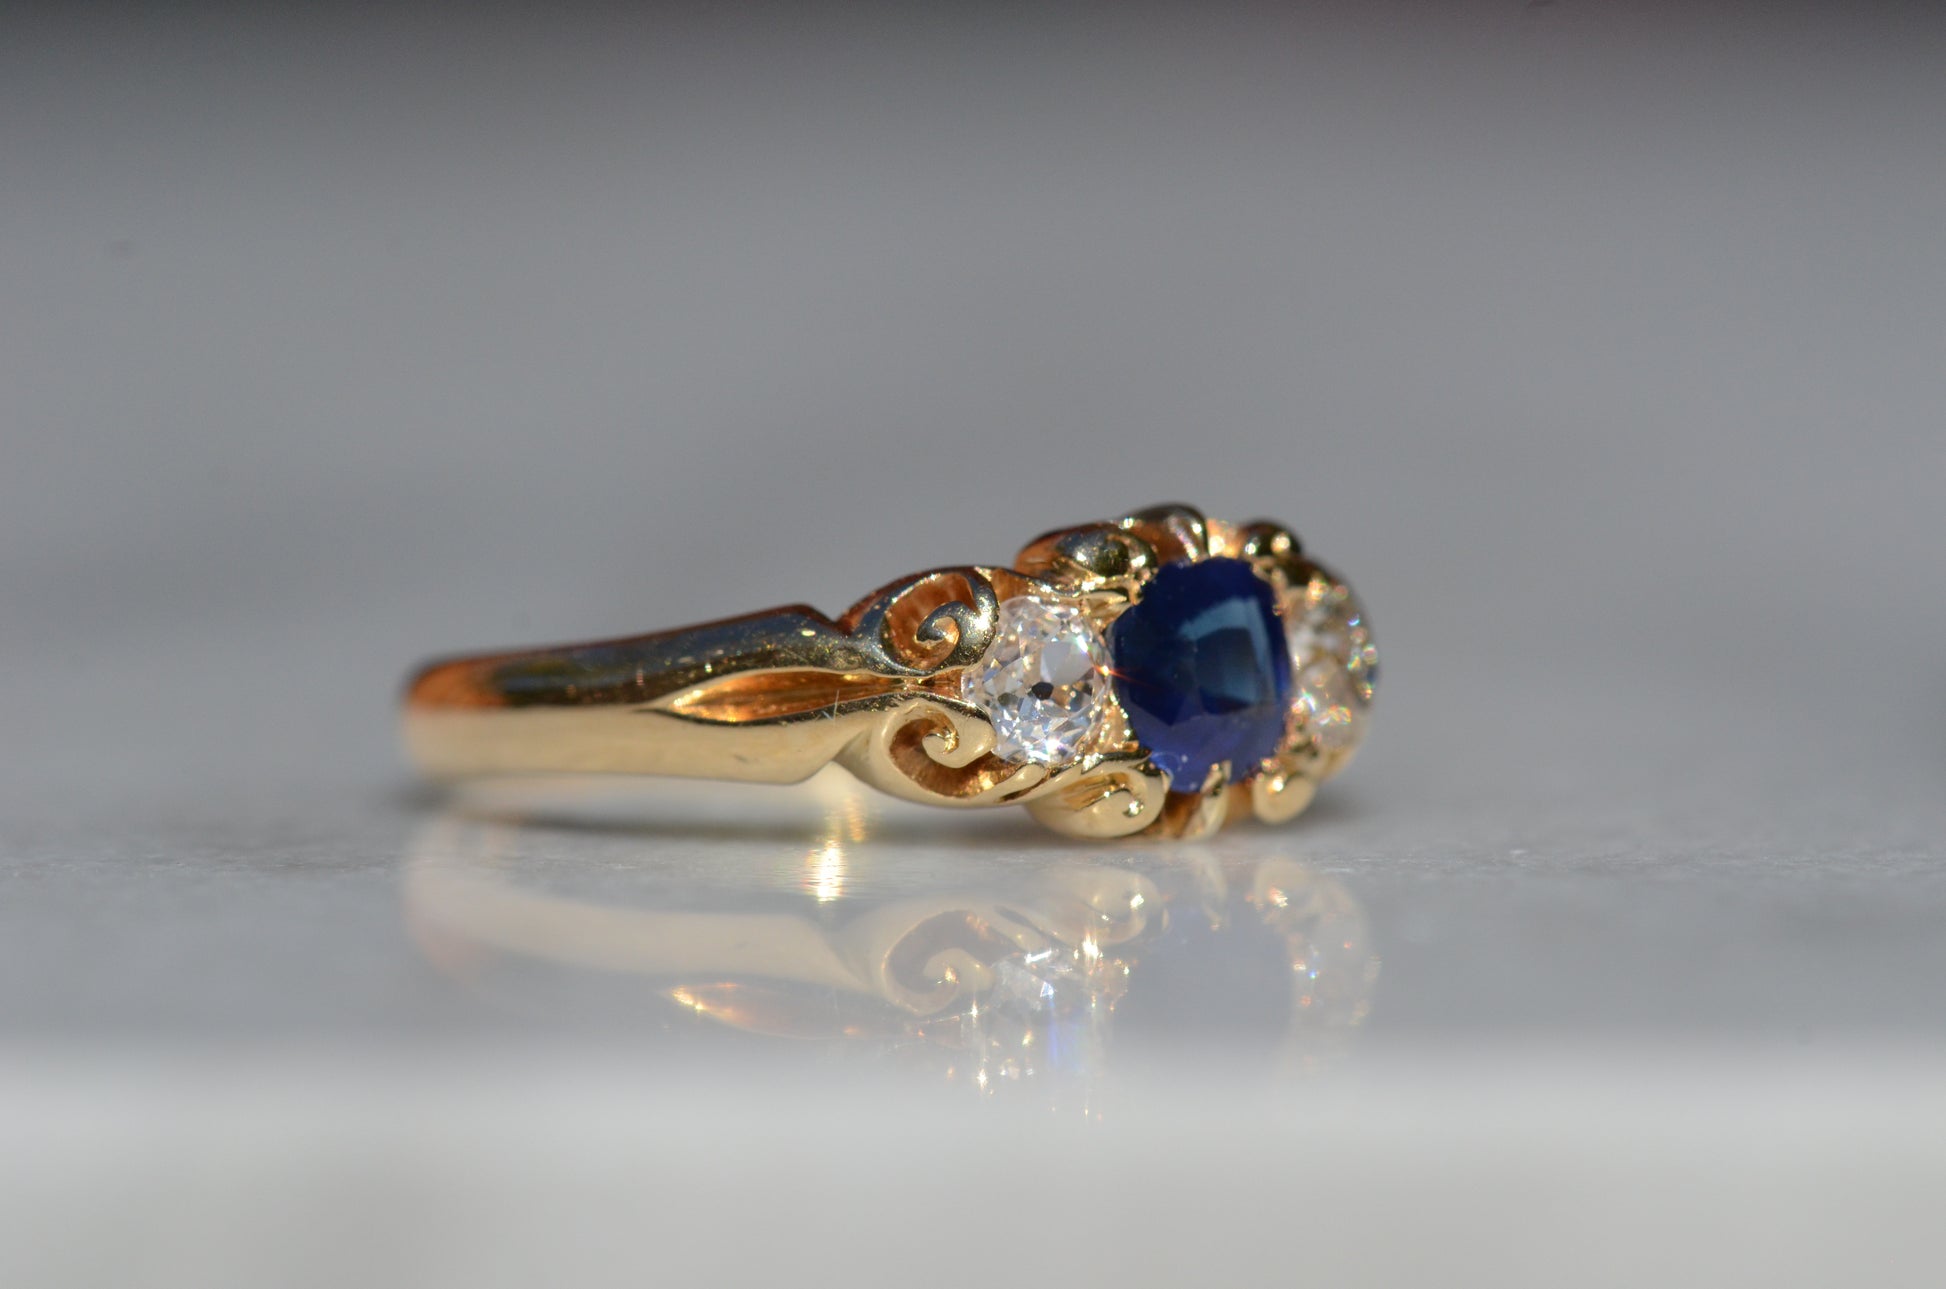 A Victorian ring in yellow gold with swirling shoulders and a central vivid blue sapphire flanked by a pair of old mine cut diamonds, photographed turned to the right to highlight the side view of the ring.